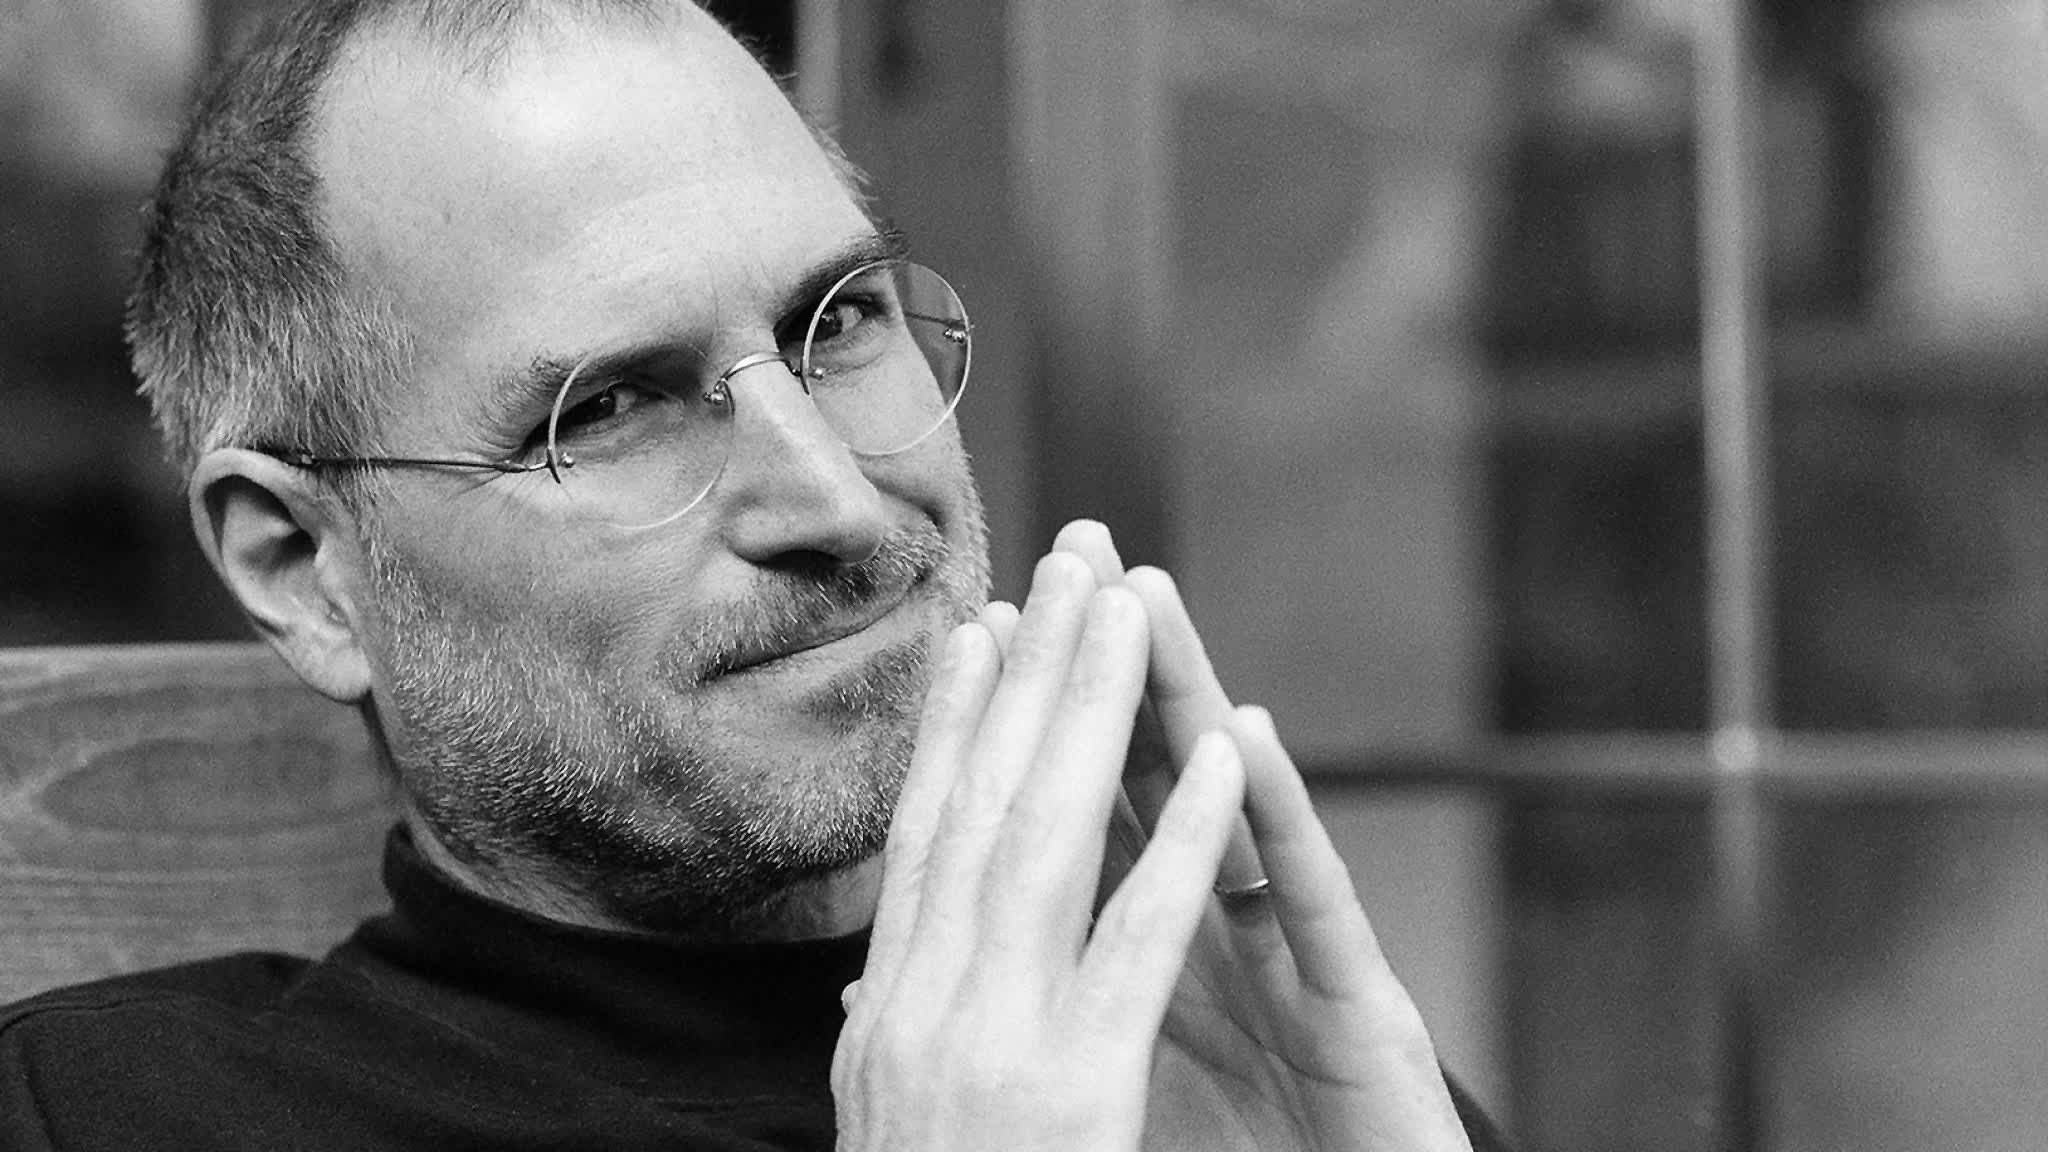 Steve Jobs' family, friends and colleagues remember him on the 10th anniversary of his death